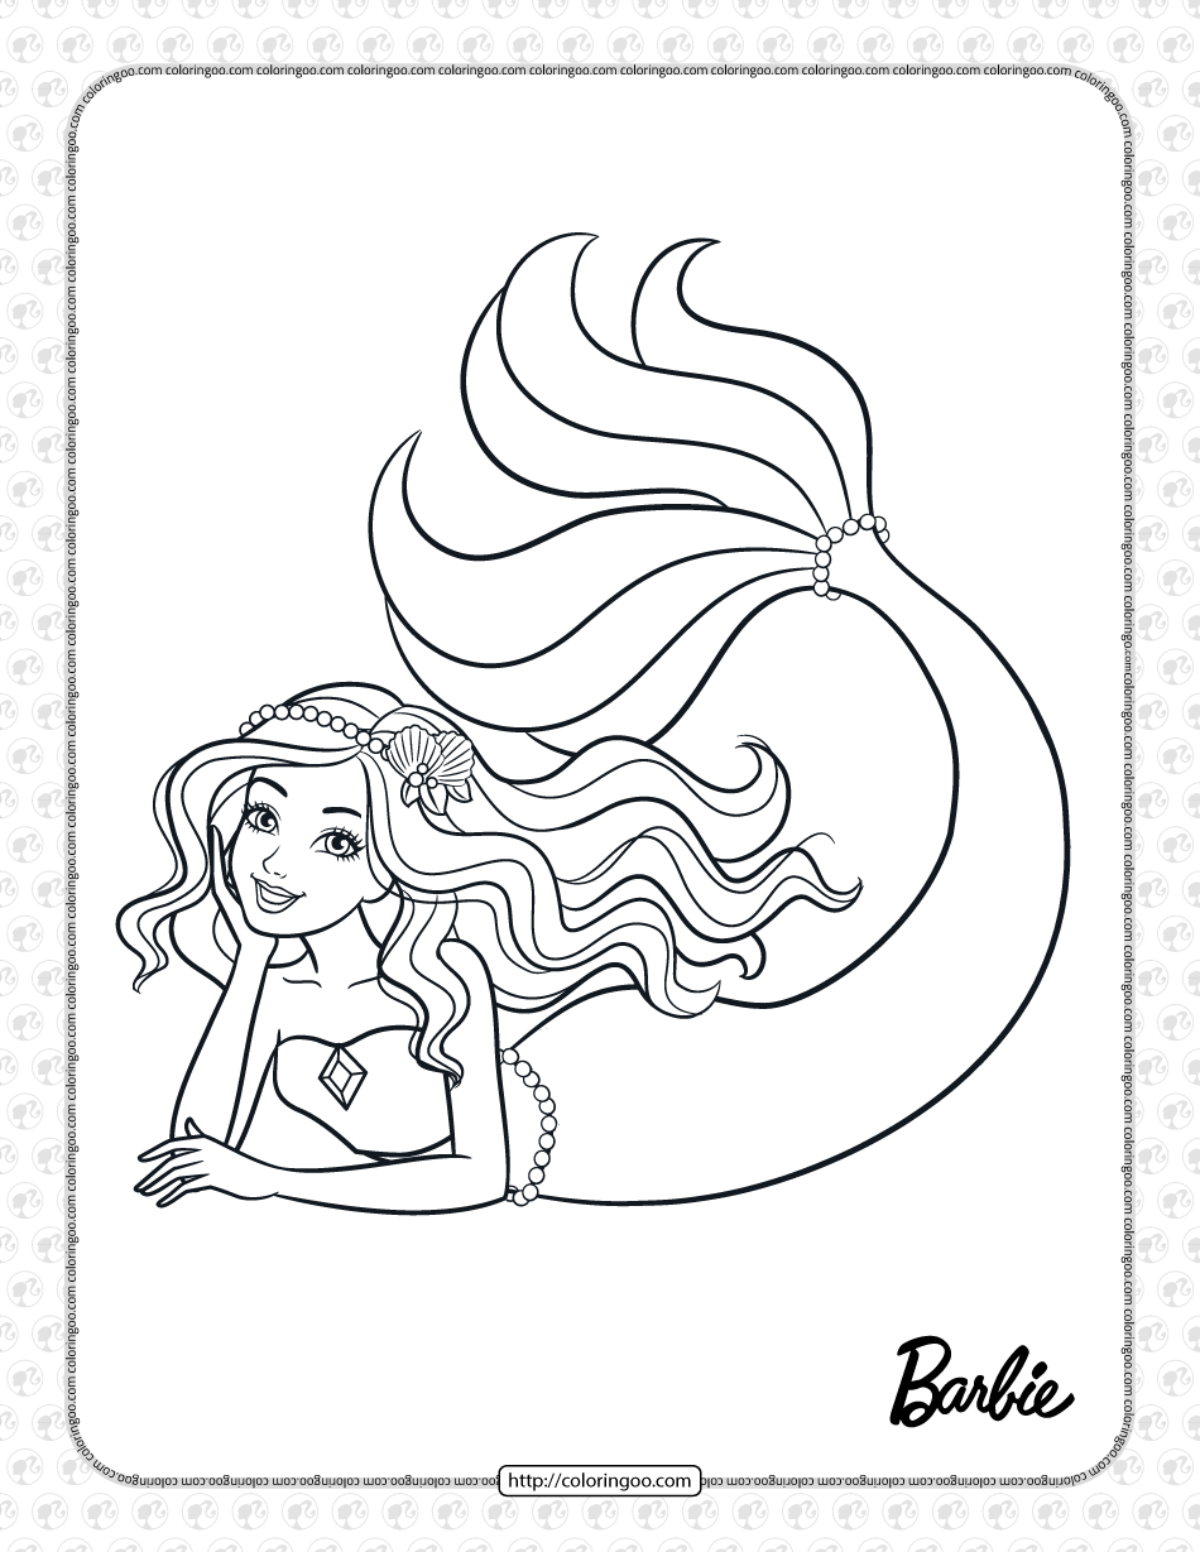 Decorate The Mermaid Tail Barbie Coloring Page